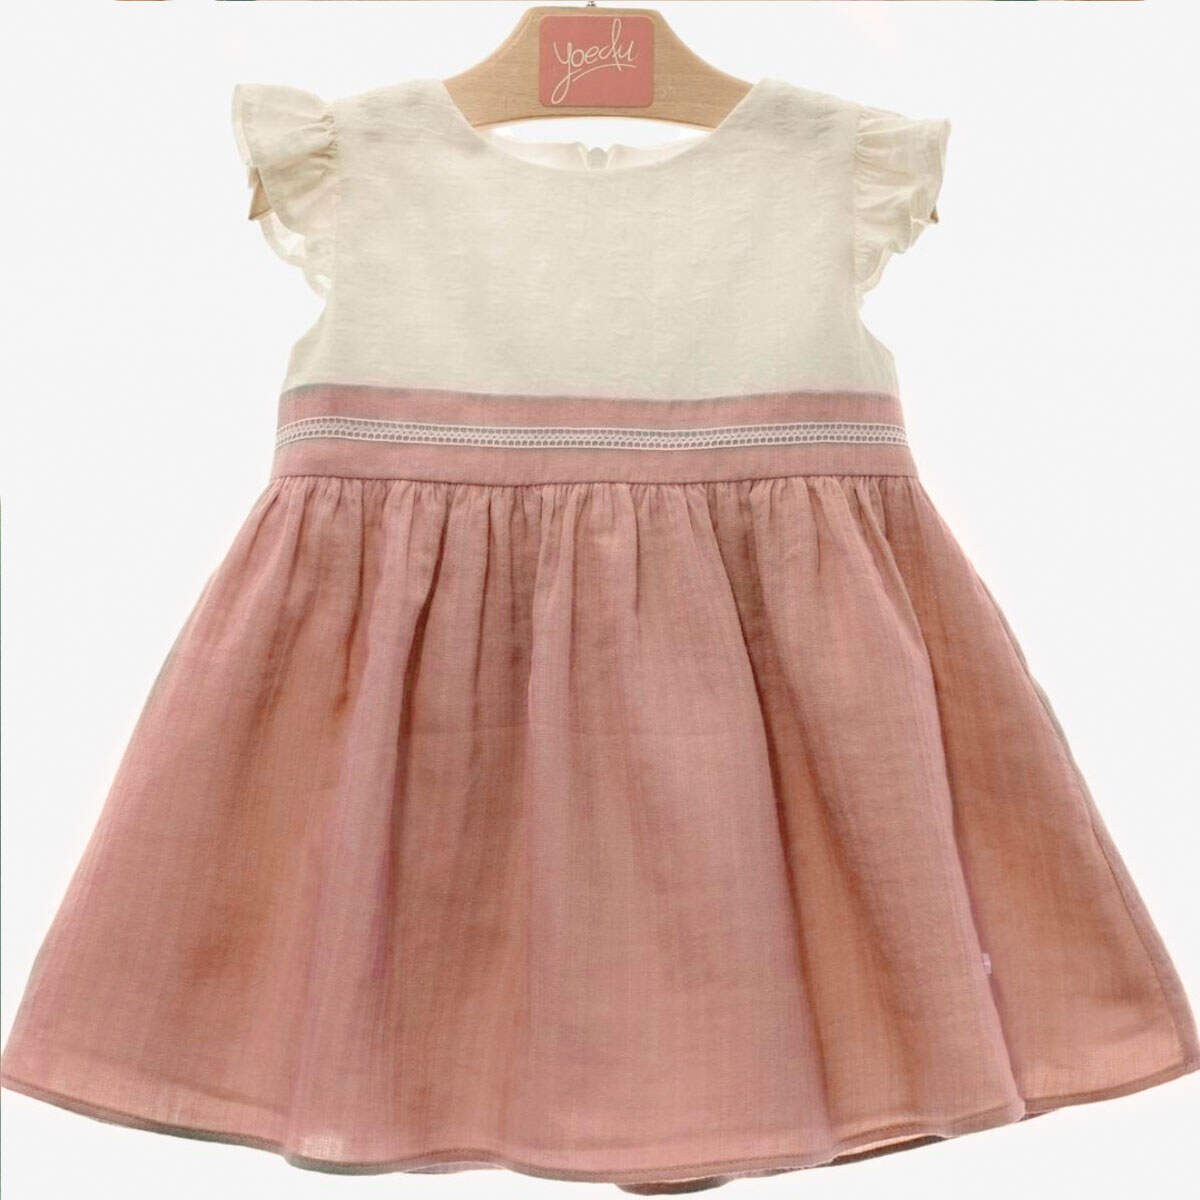 DRESS WITH BOW AT THE BACK PINK DELSUR - 1